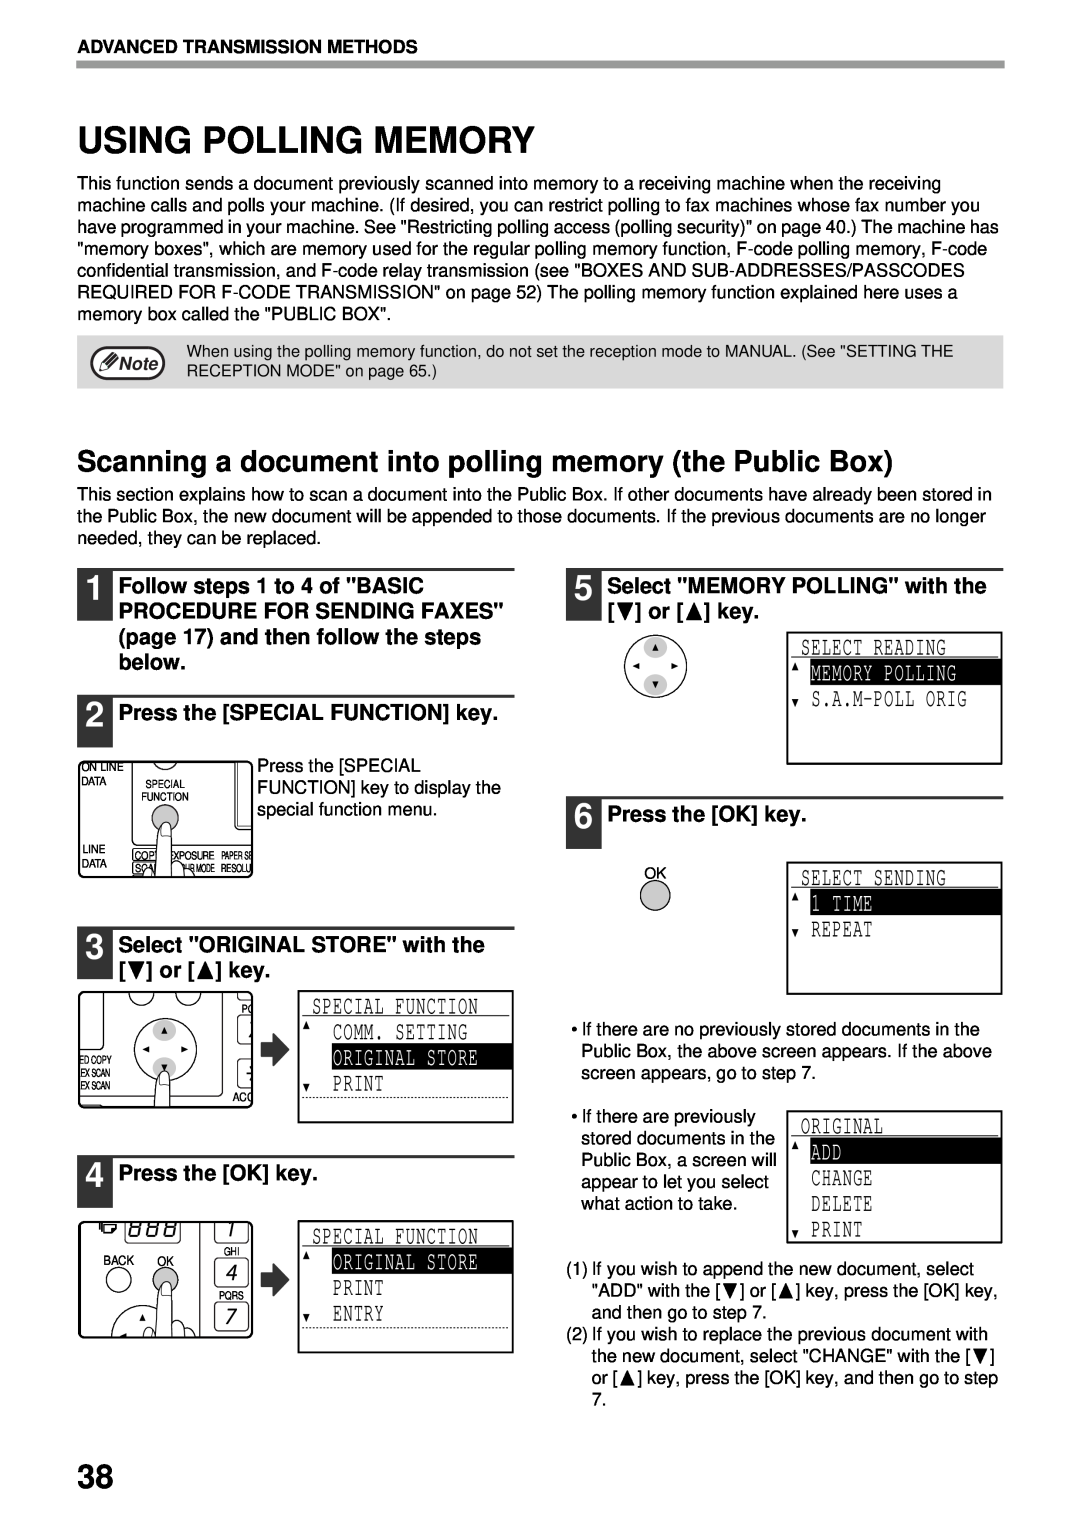 Sharp MX-FX13 appendix Using Polling Memory, Scanning a document into polling memory the Public Box, Memory Polling, Time 